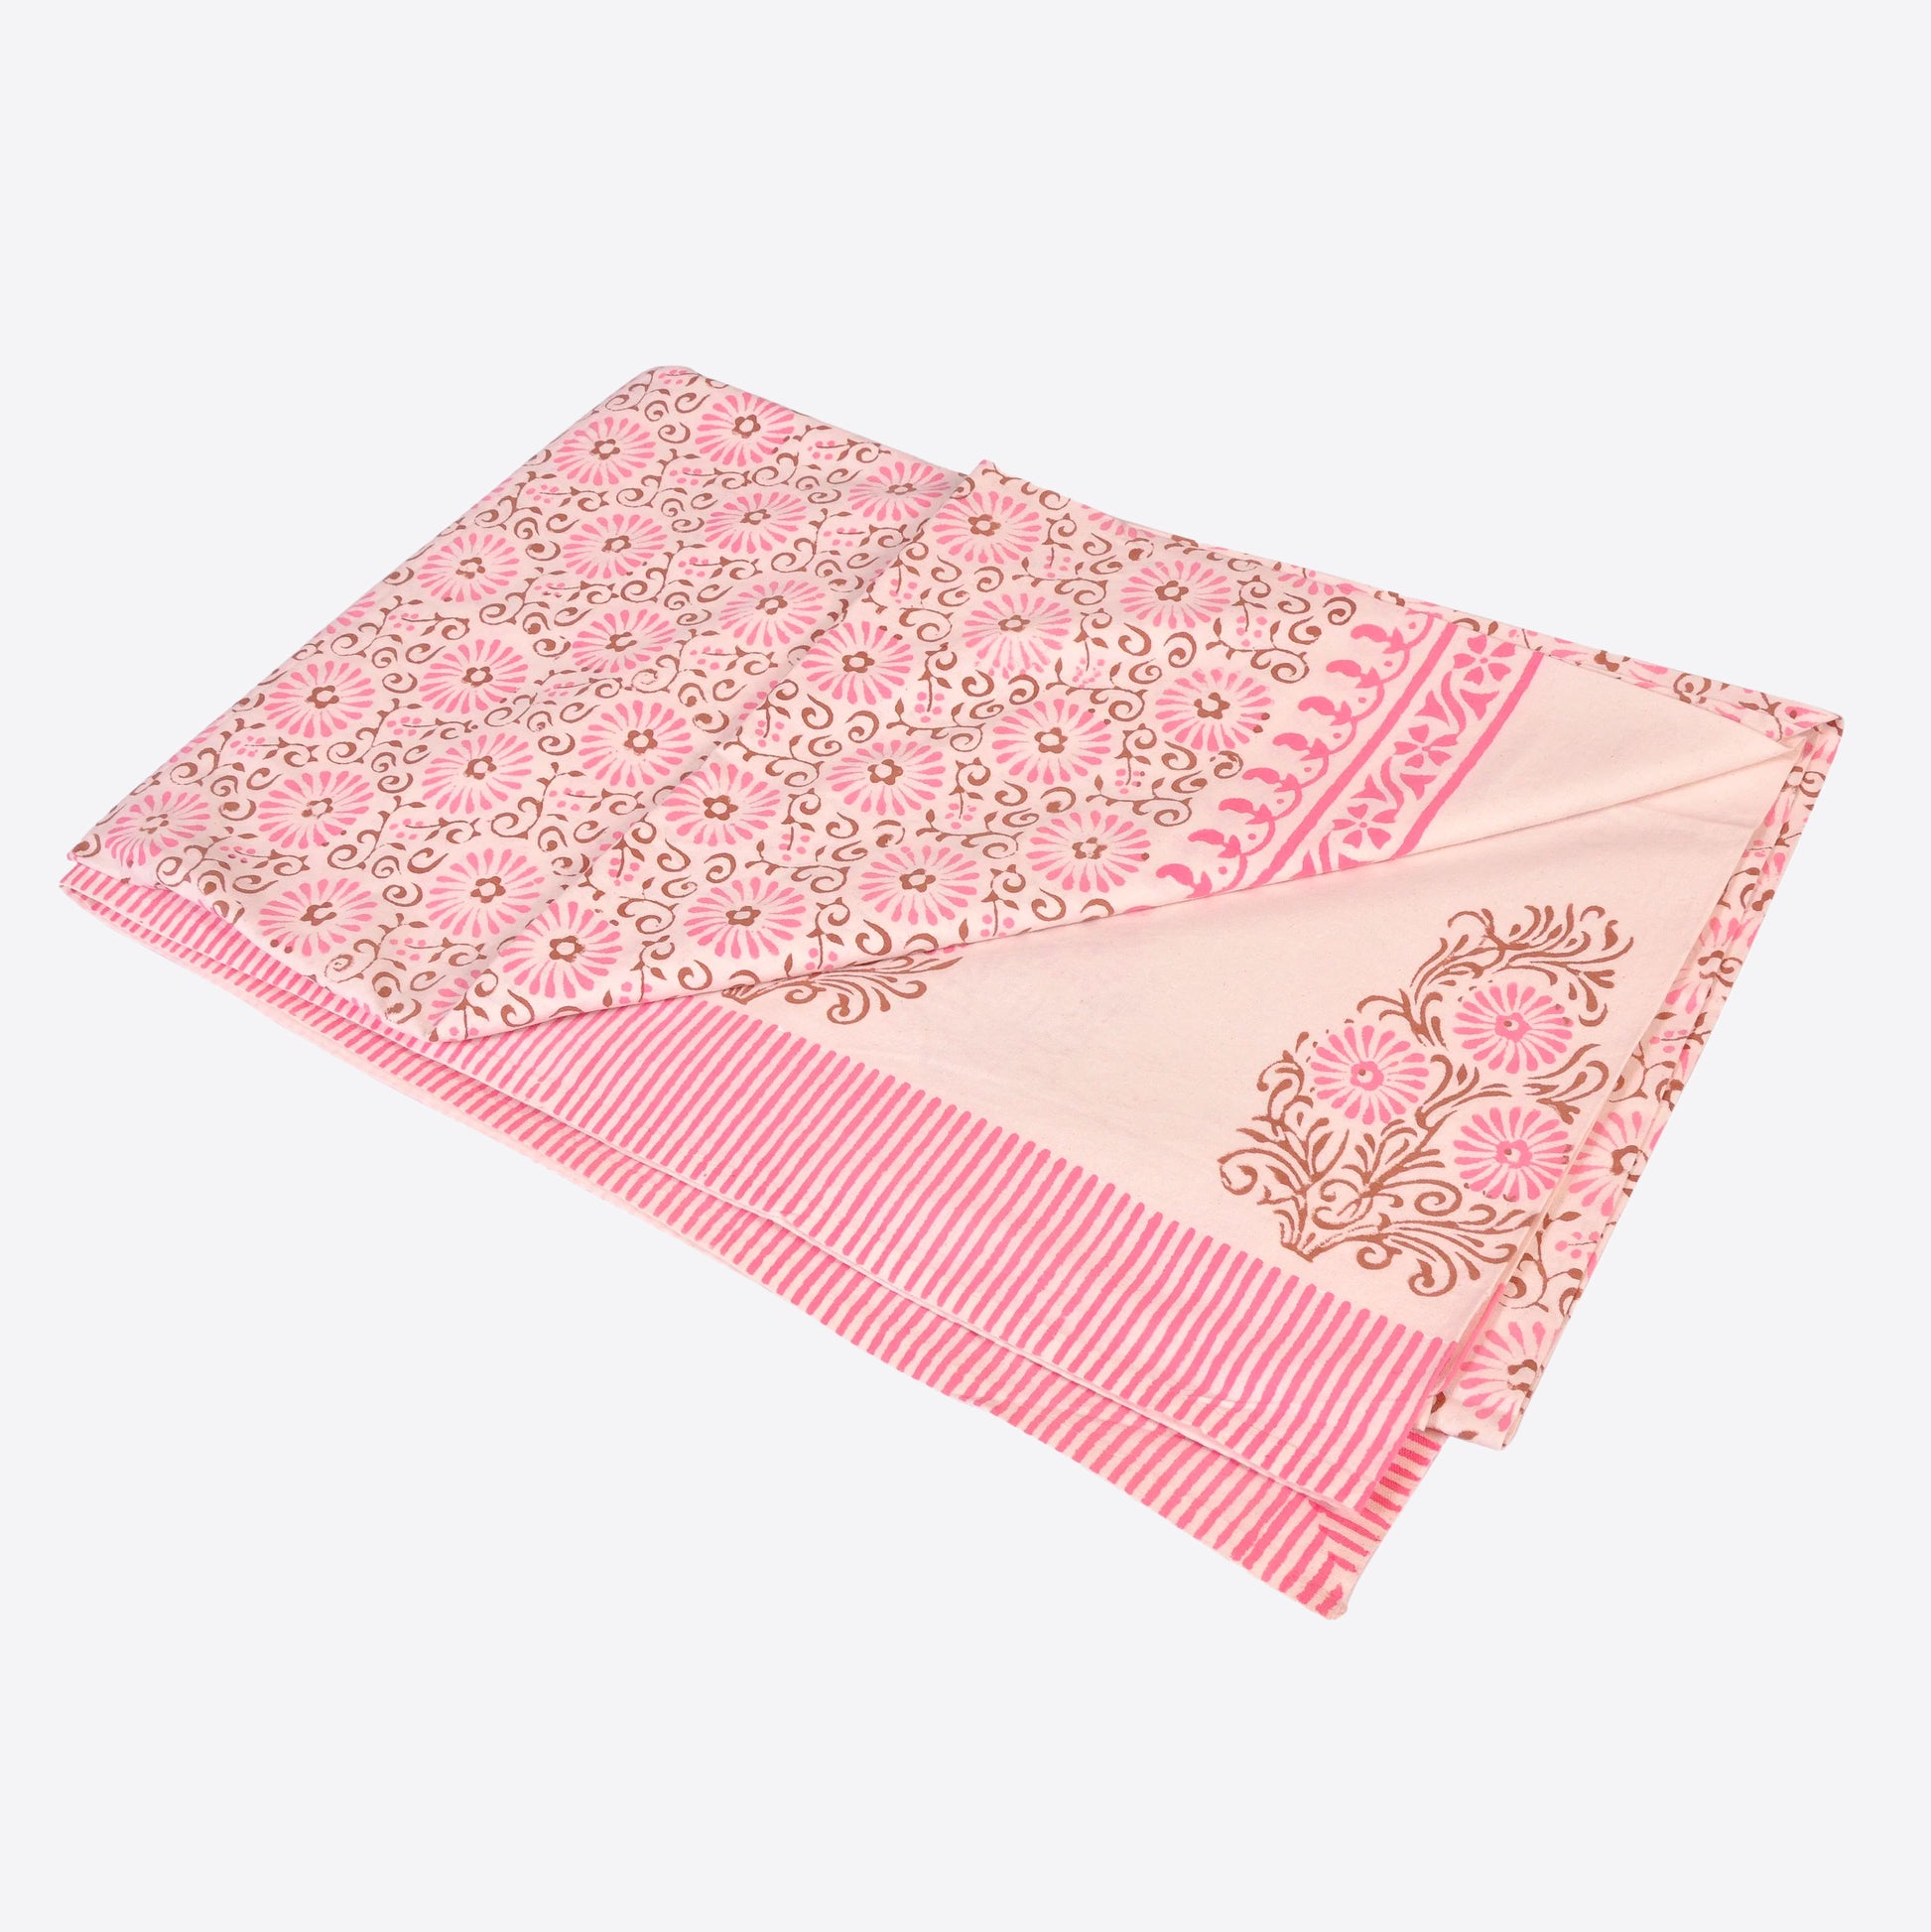 Pink Flowers and Stripes Cotton Tablecloth Large Joanna Wood Shop